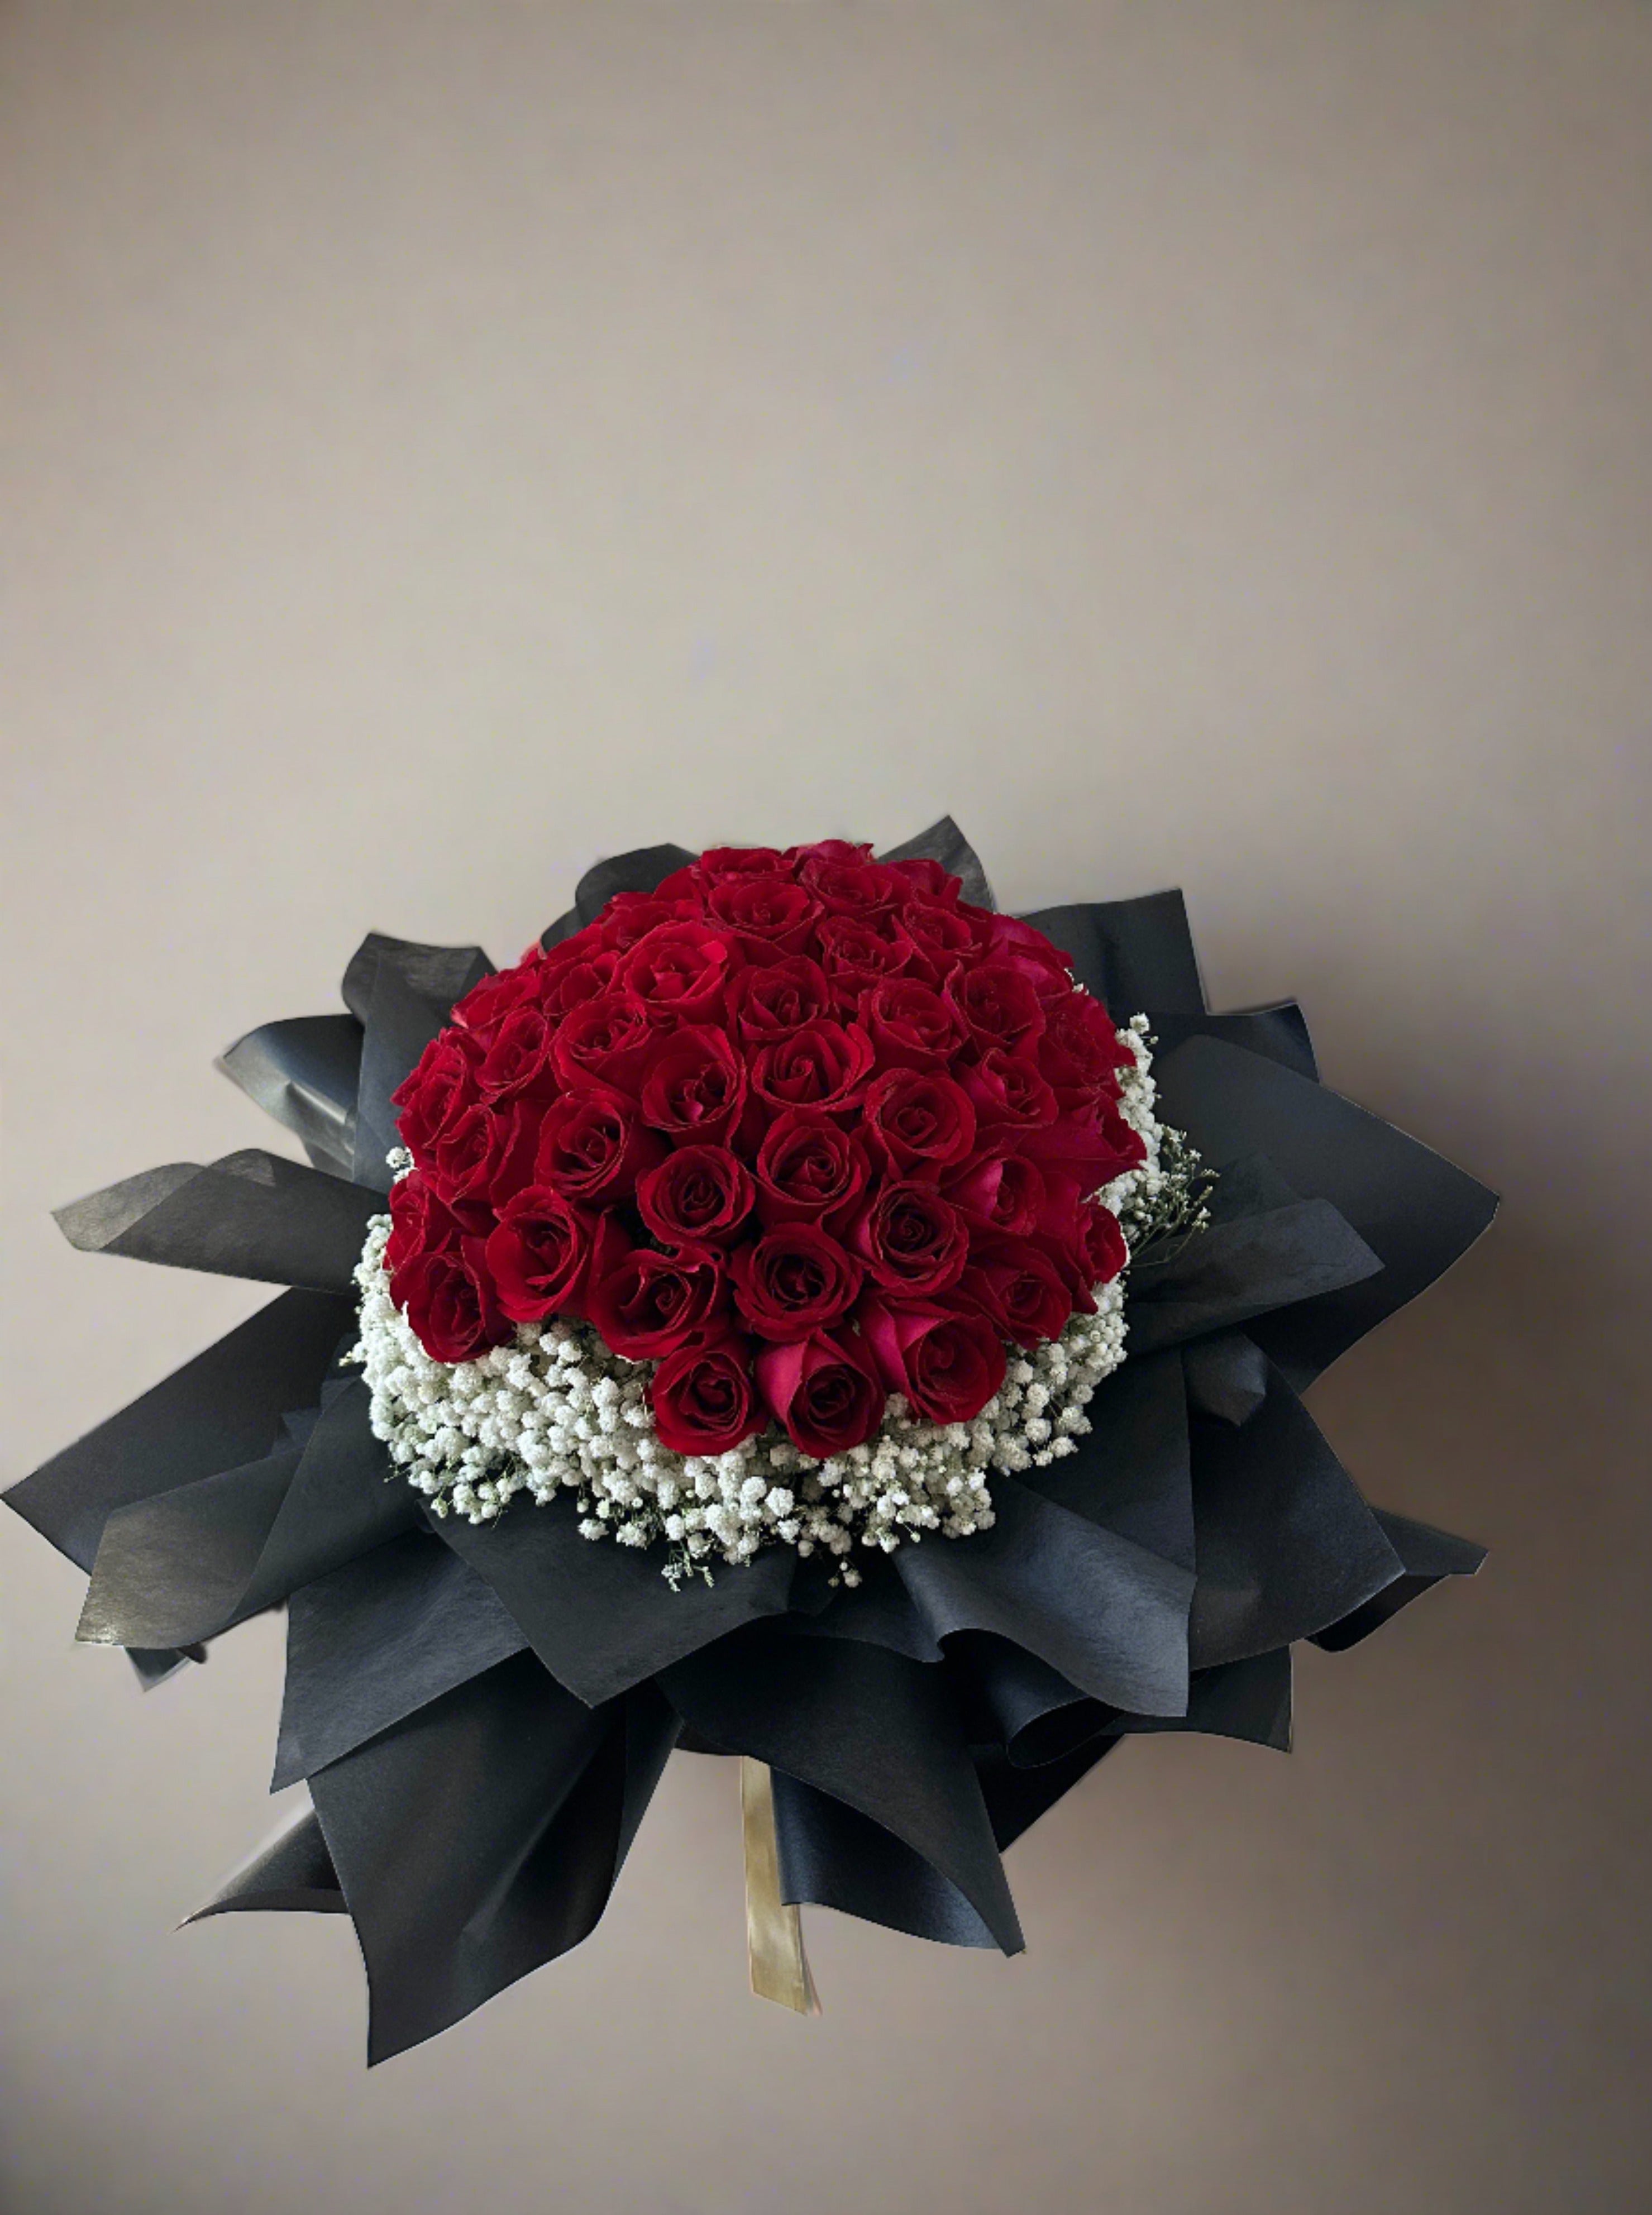 [4 days in advance] Love, Ava - Large Rose Bouquet (50/ 99/108 stalks)